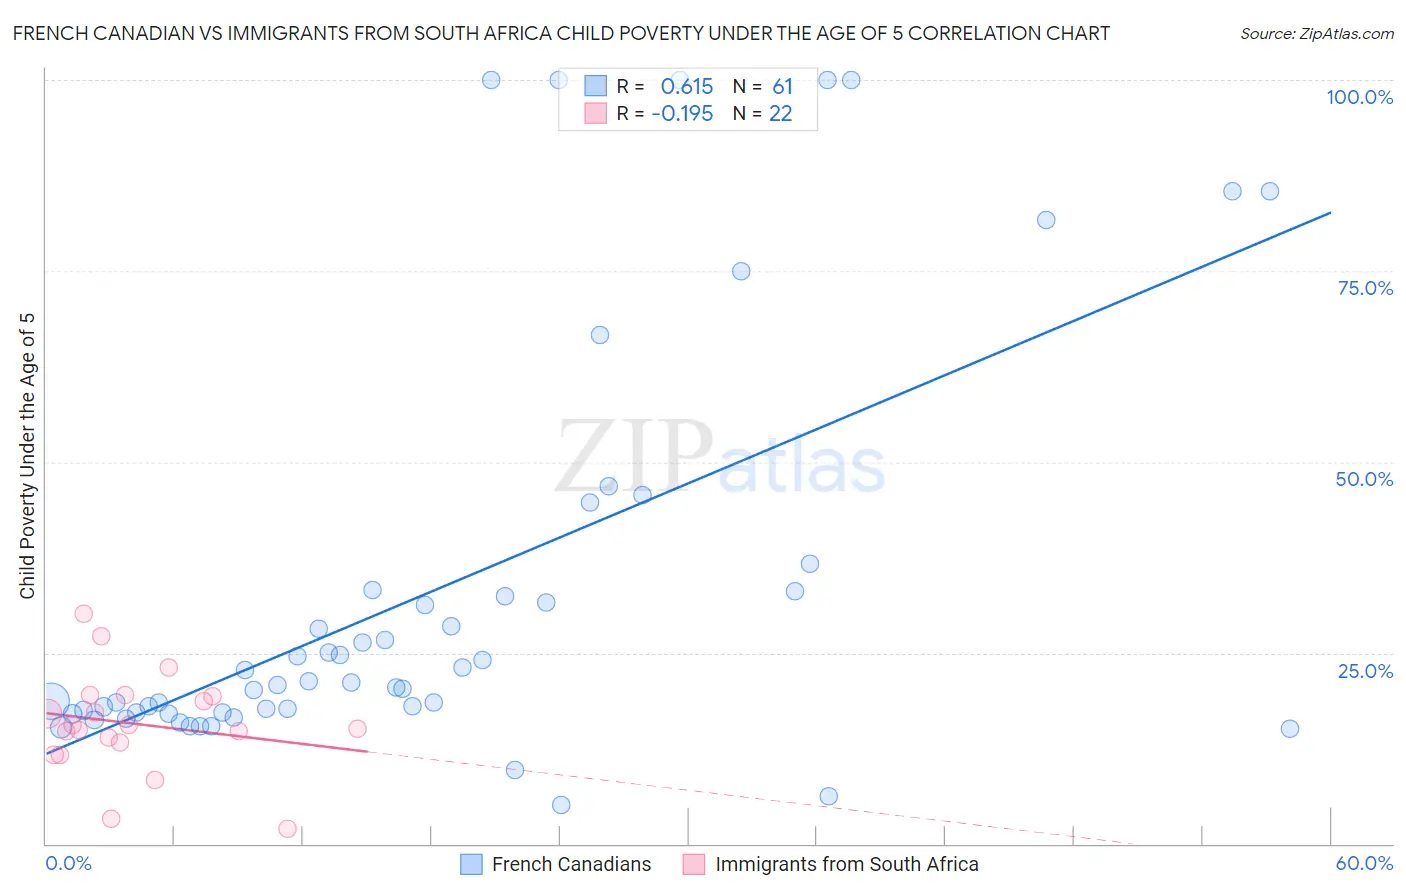 French Canadian vs Immigrants from South Africa Child Poverty Under the Age of 5